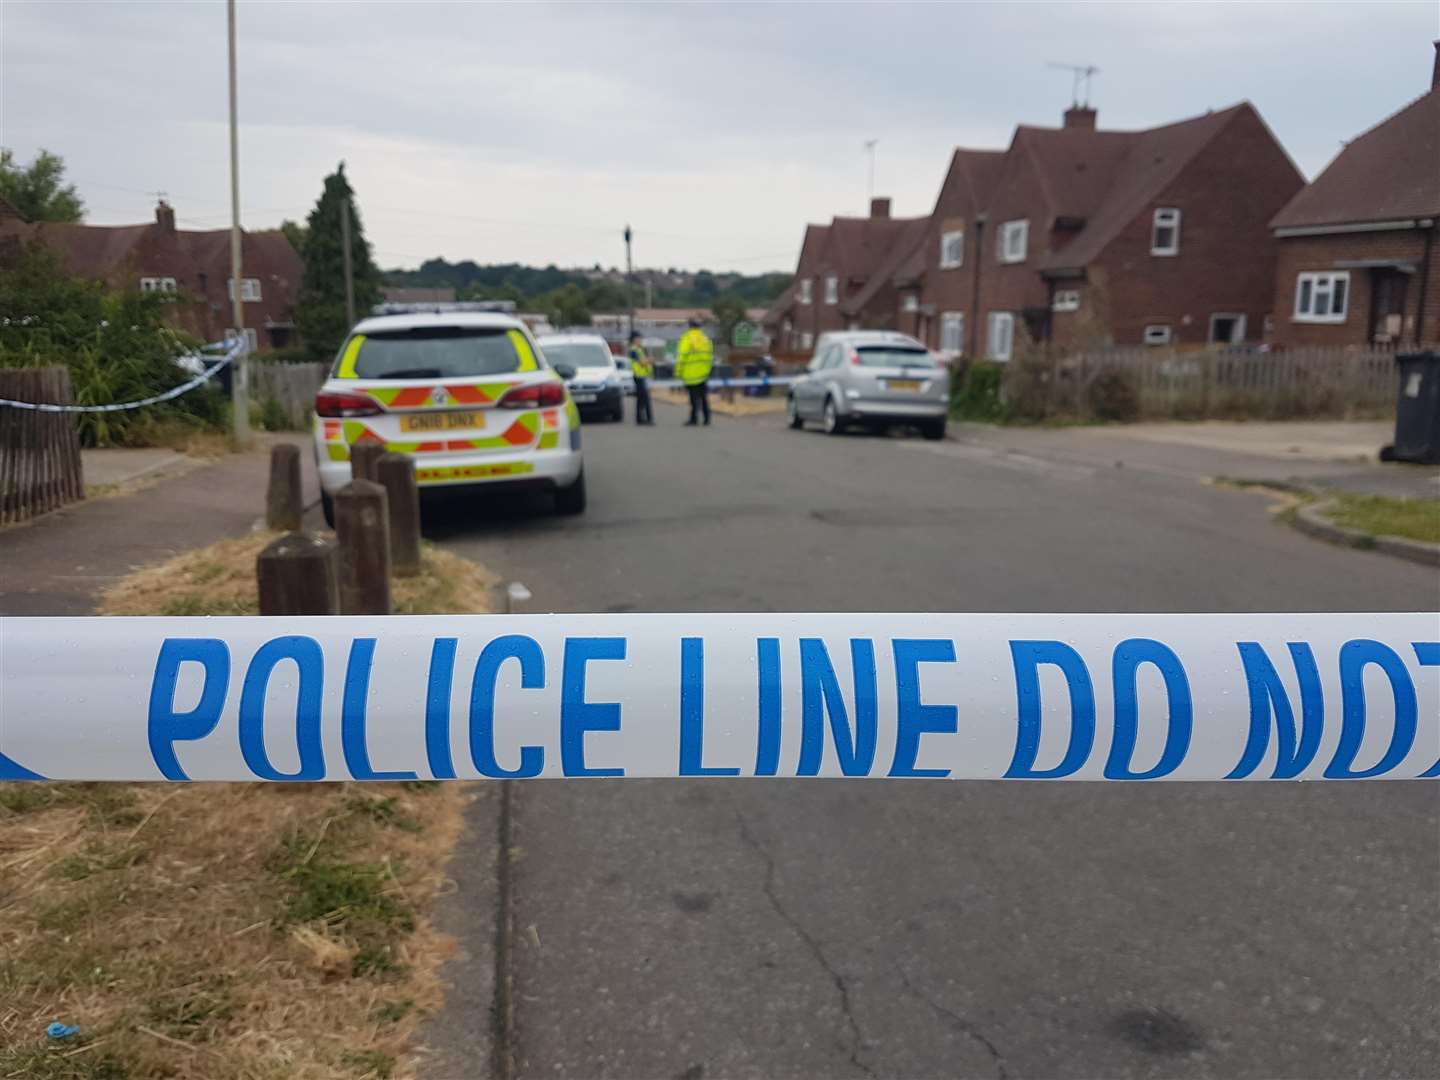 Godwin Road, Thanington, remains cordoned off by police (3182581)